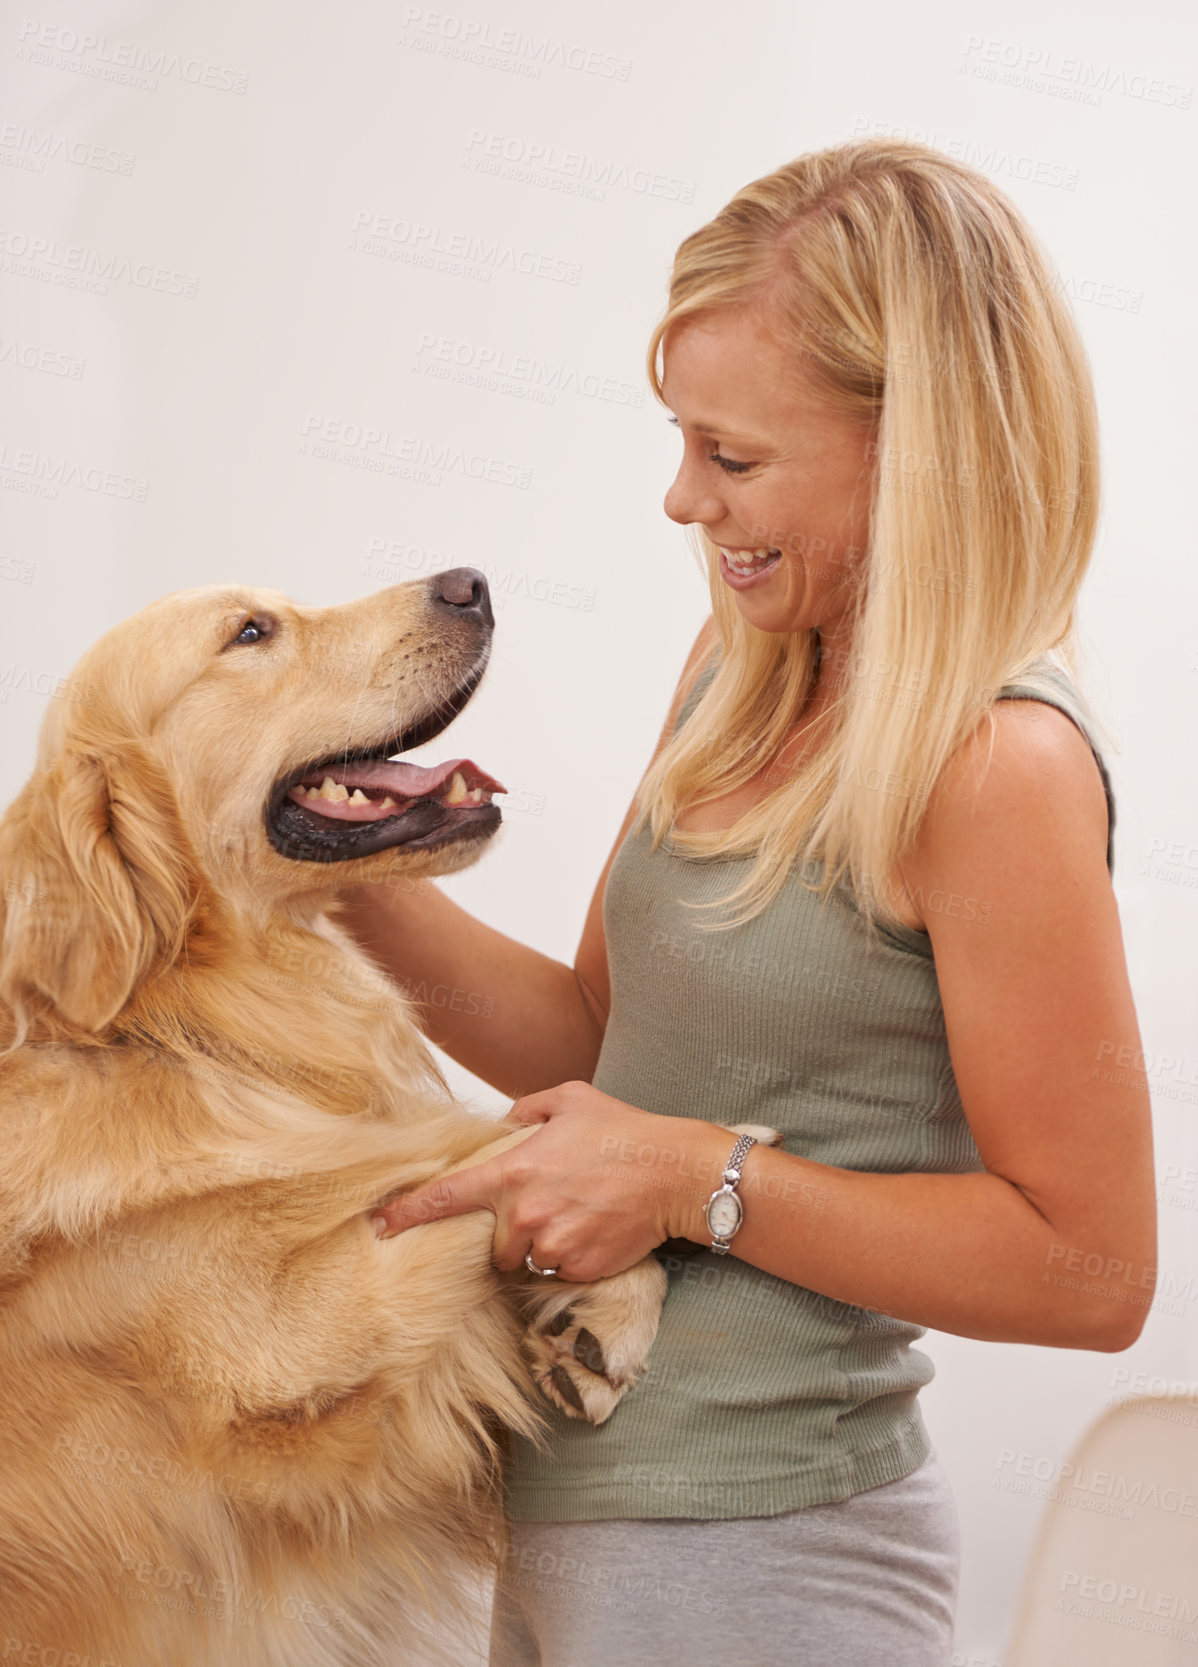 Buy stock photo A young woman and dog having playful fun at home. Smiling female playing with her curious trained canine golden labrador retriever inside. Showing affection by petting and rubbing while she smiles